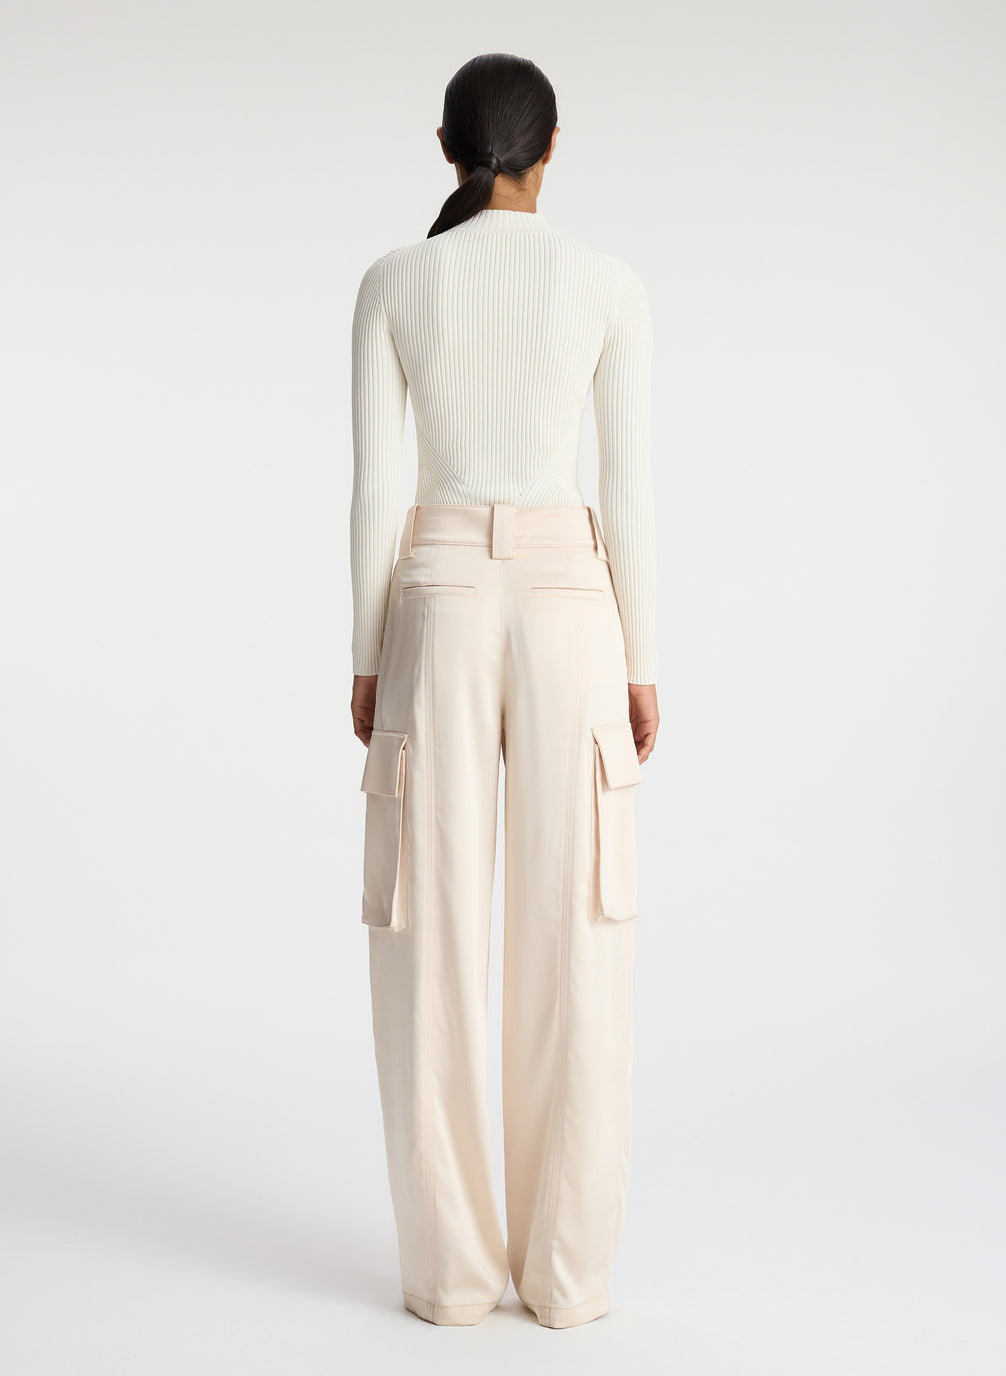 back view of woman wearing white half zip mock neck long sleeve knit top and off white satin cargo pants